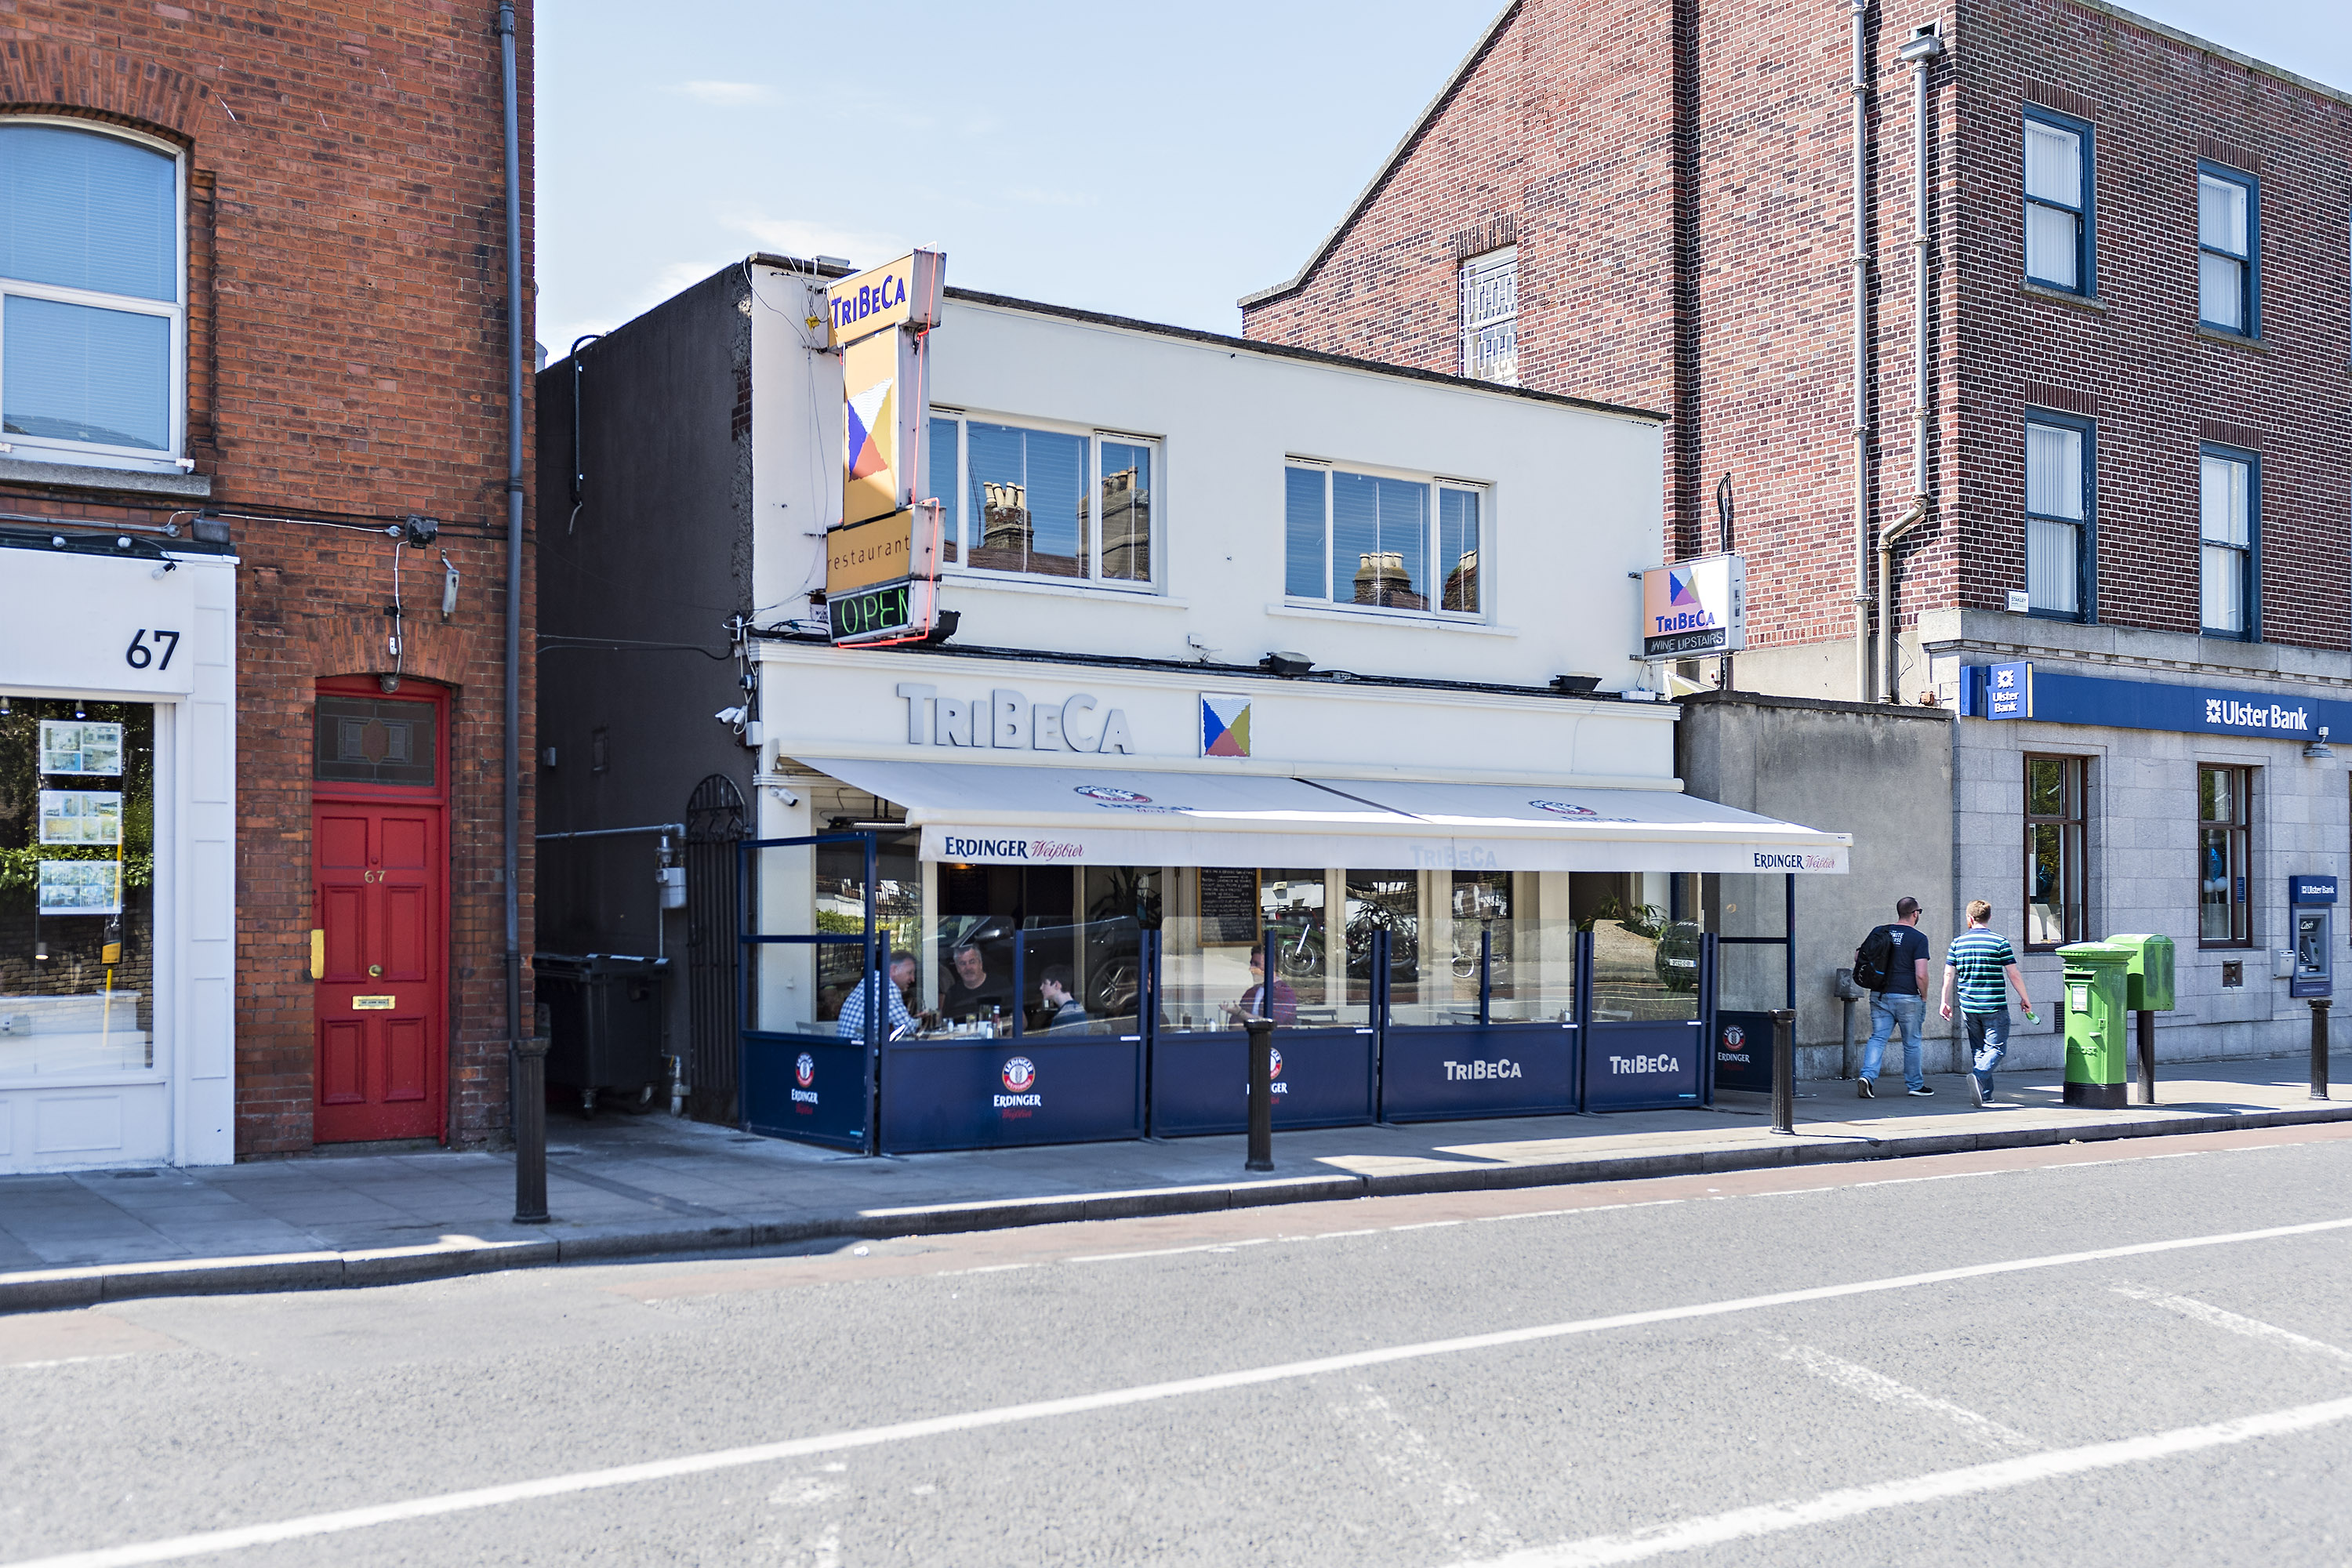 QRE Launches Popular Ranelagh Restaurant to the Market